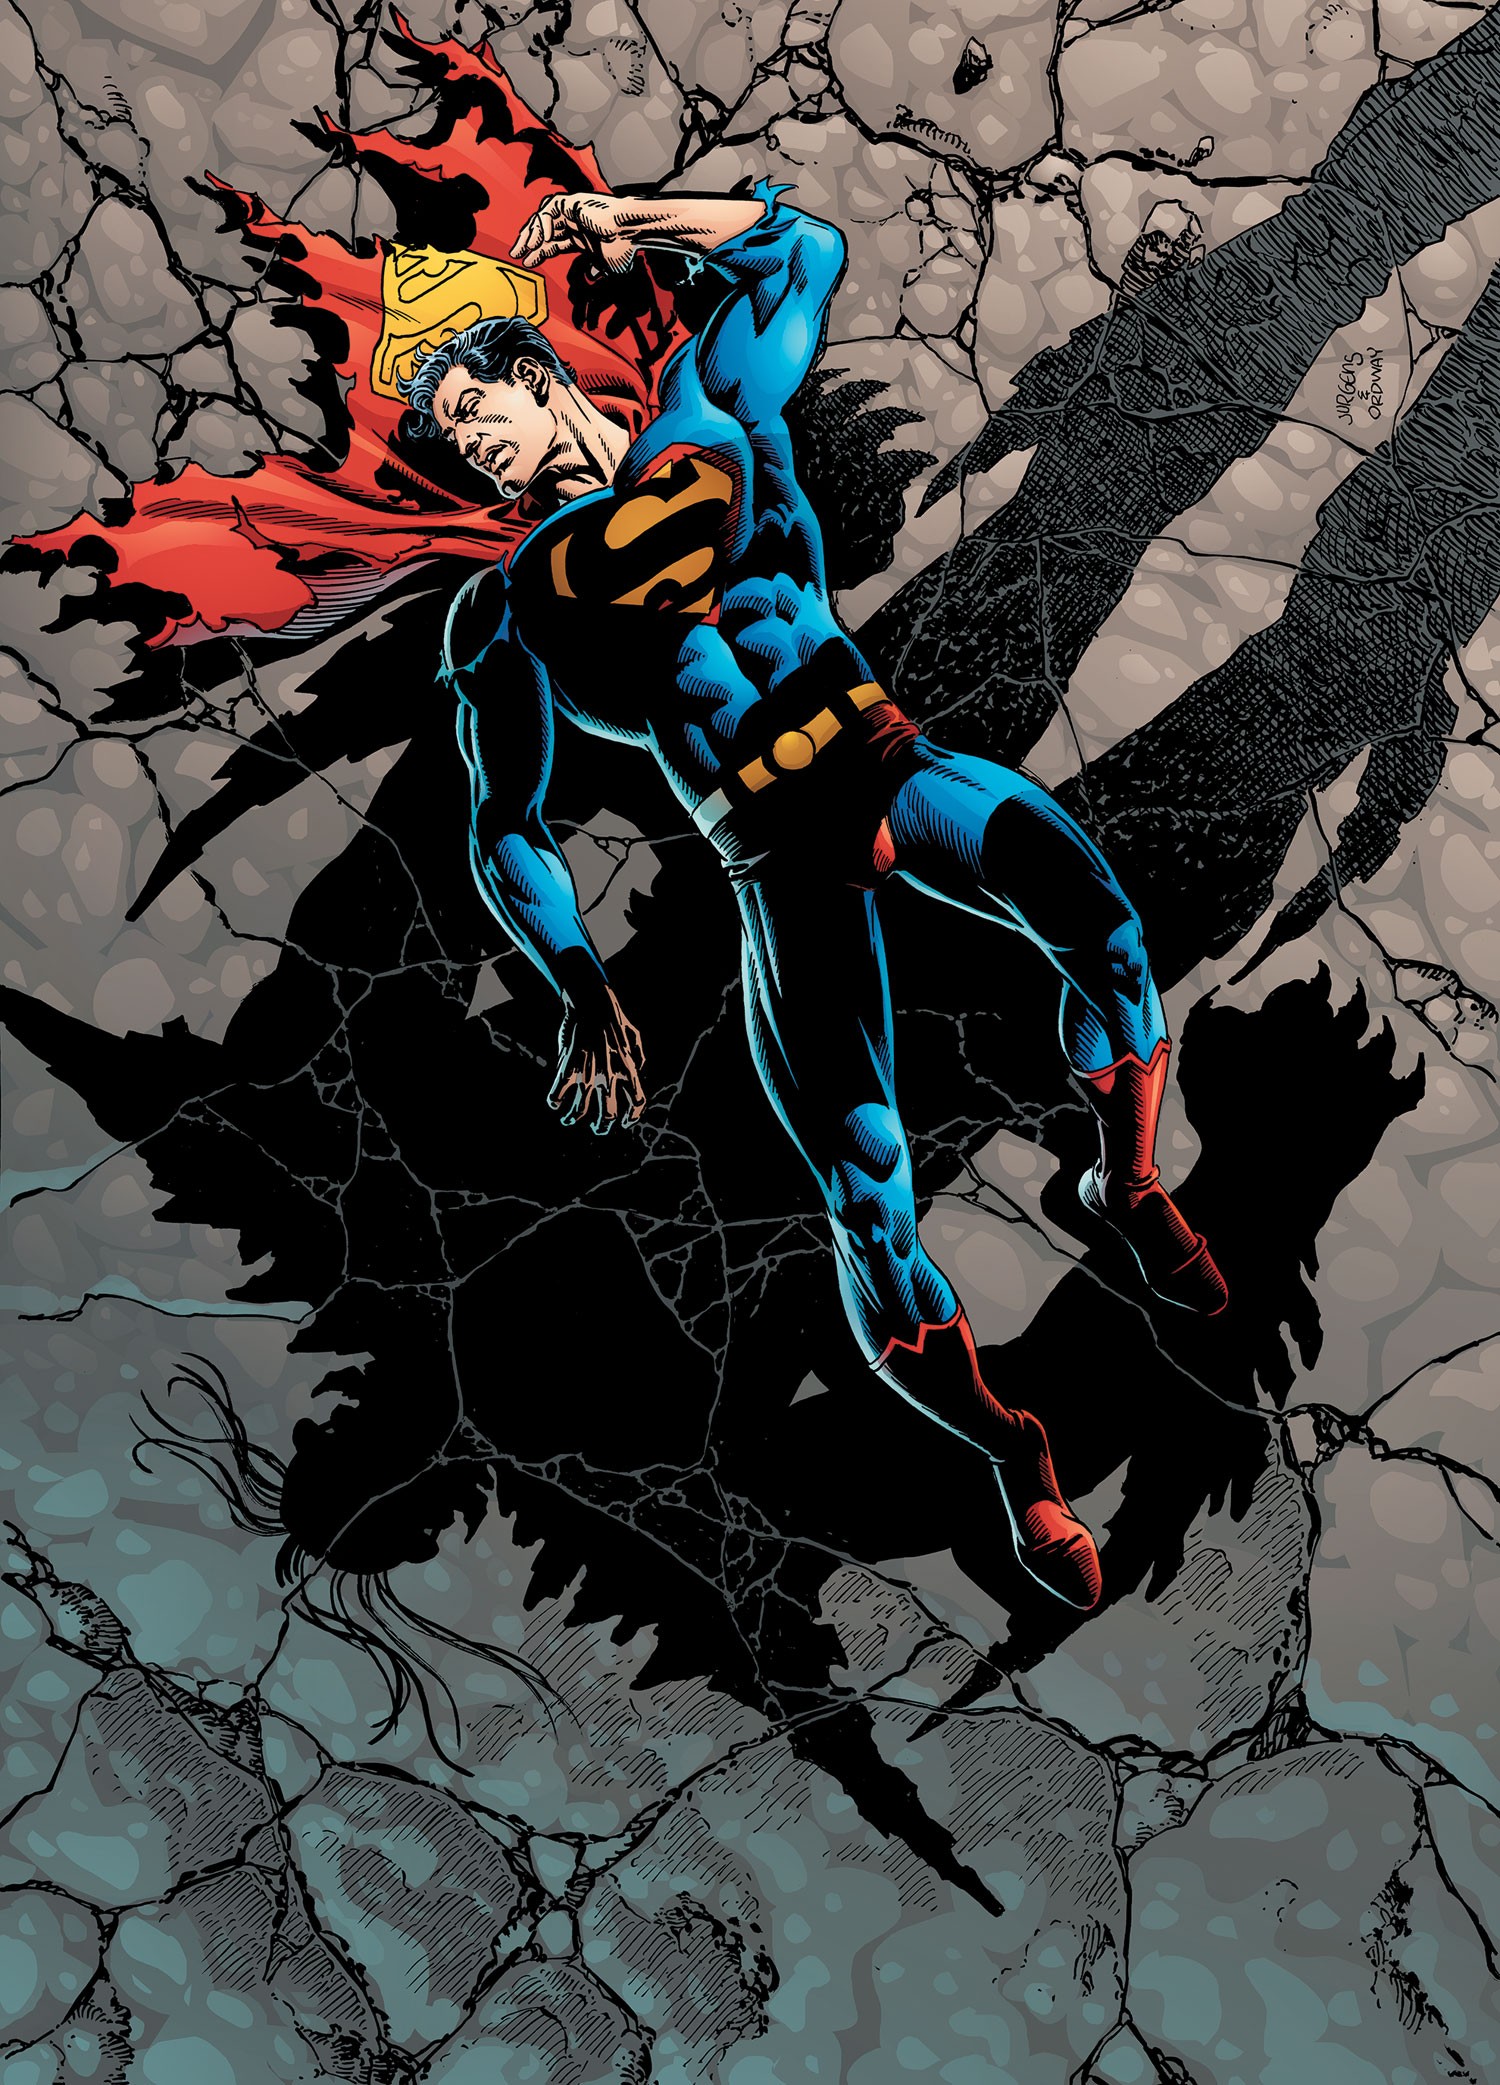 Superman: The Death and Return of Superman Vol. 2 #1